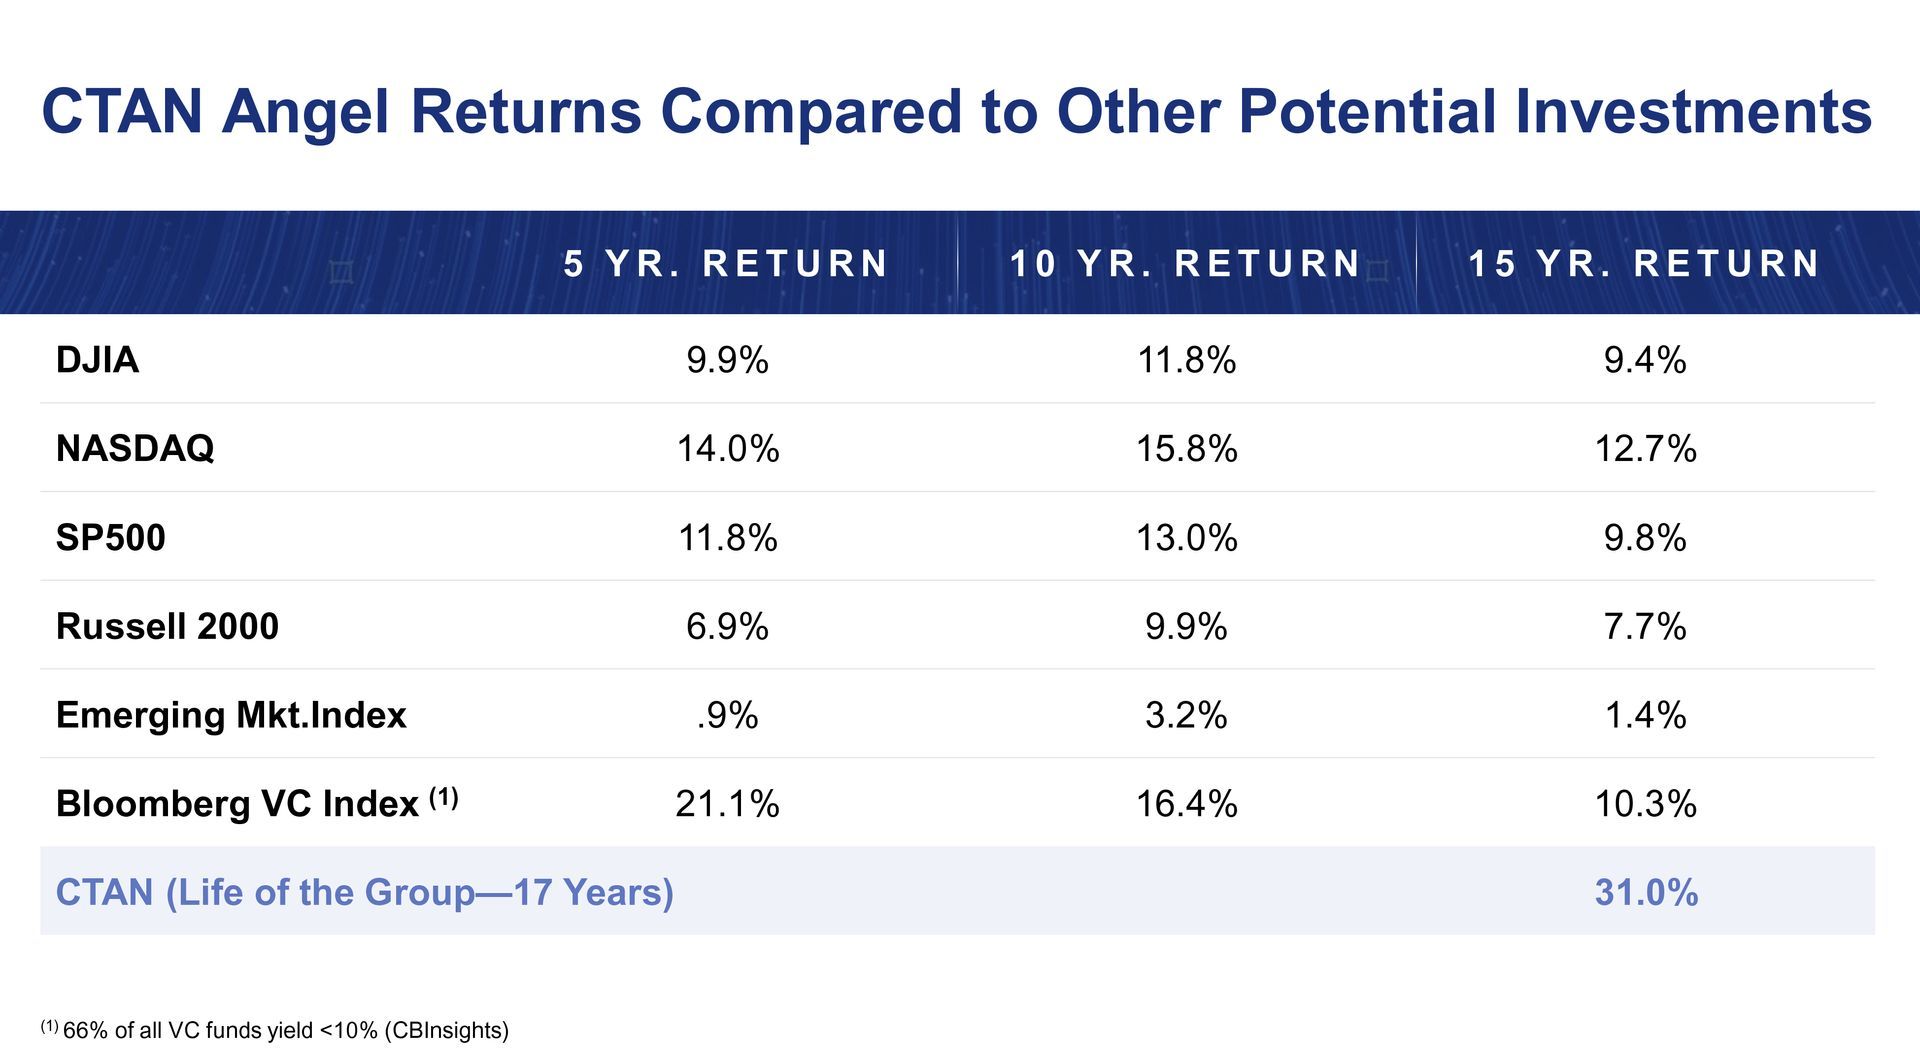 CTAN Angel Returns Compared to Other Potential Investments